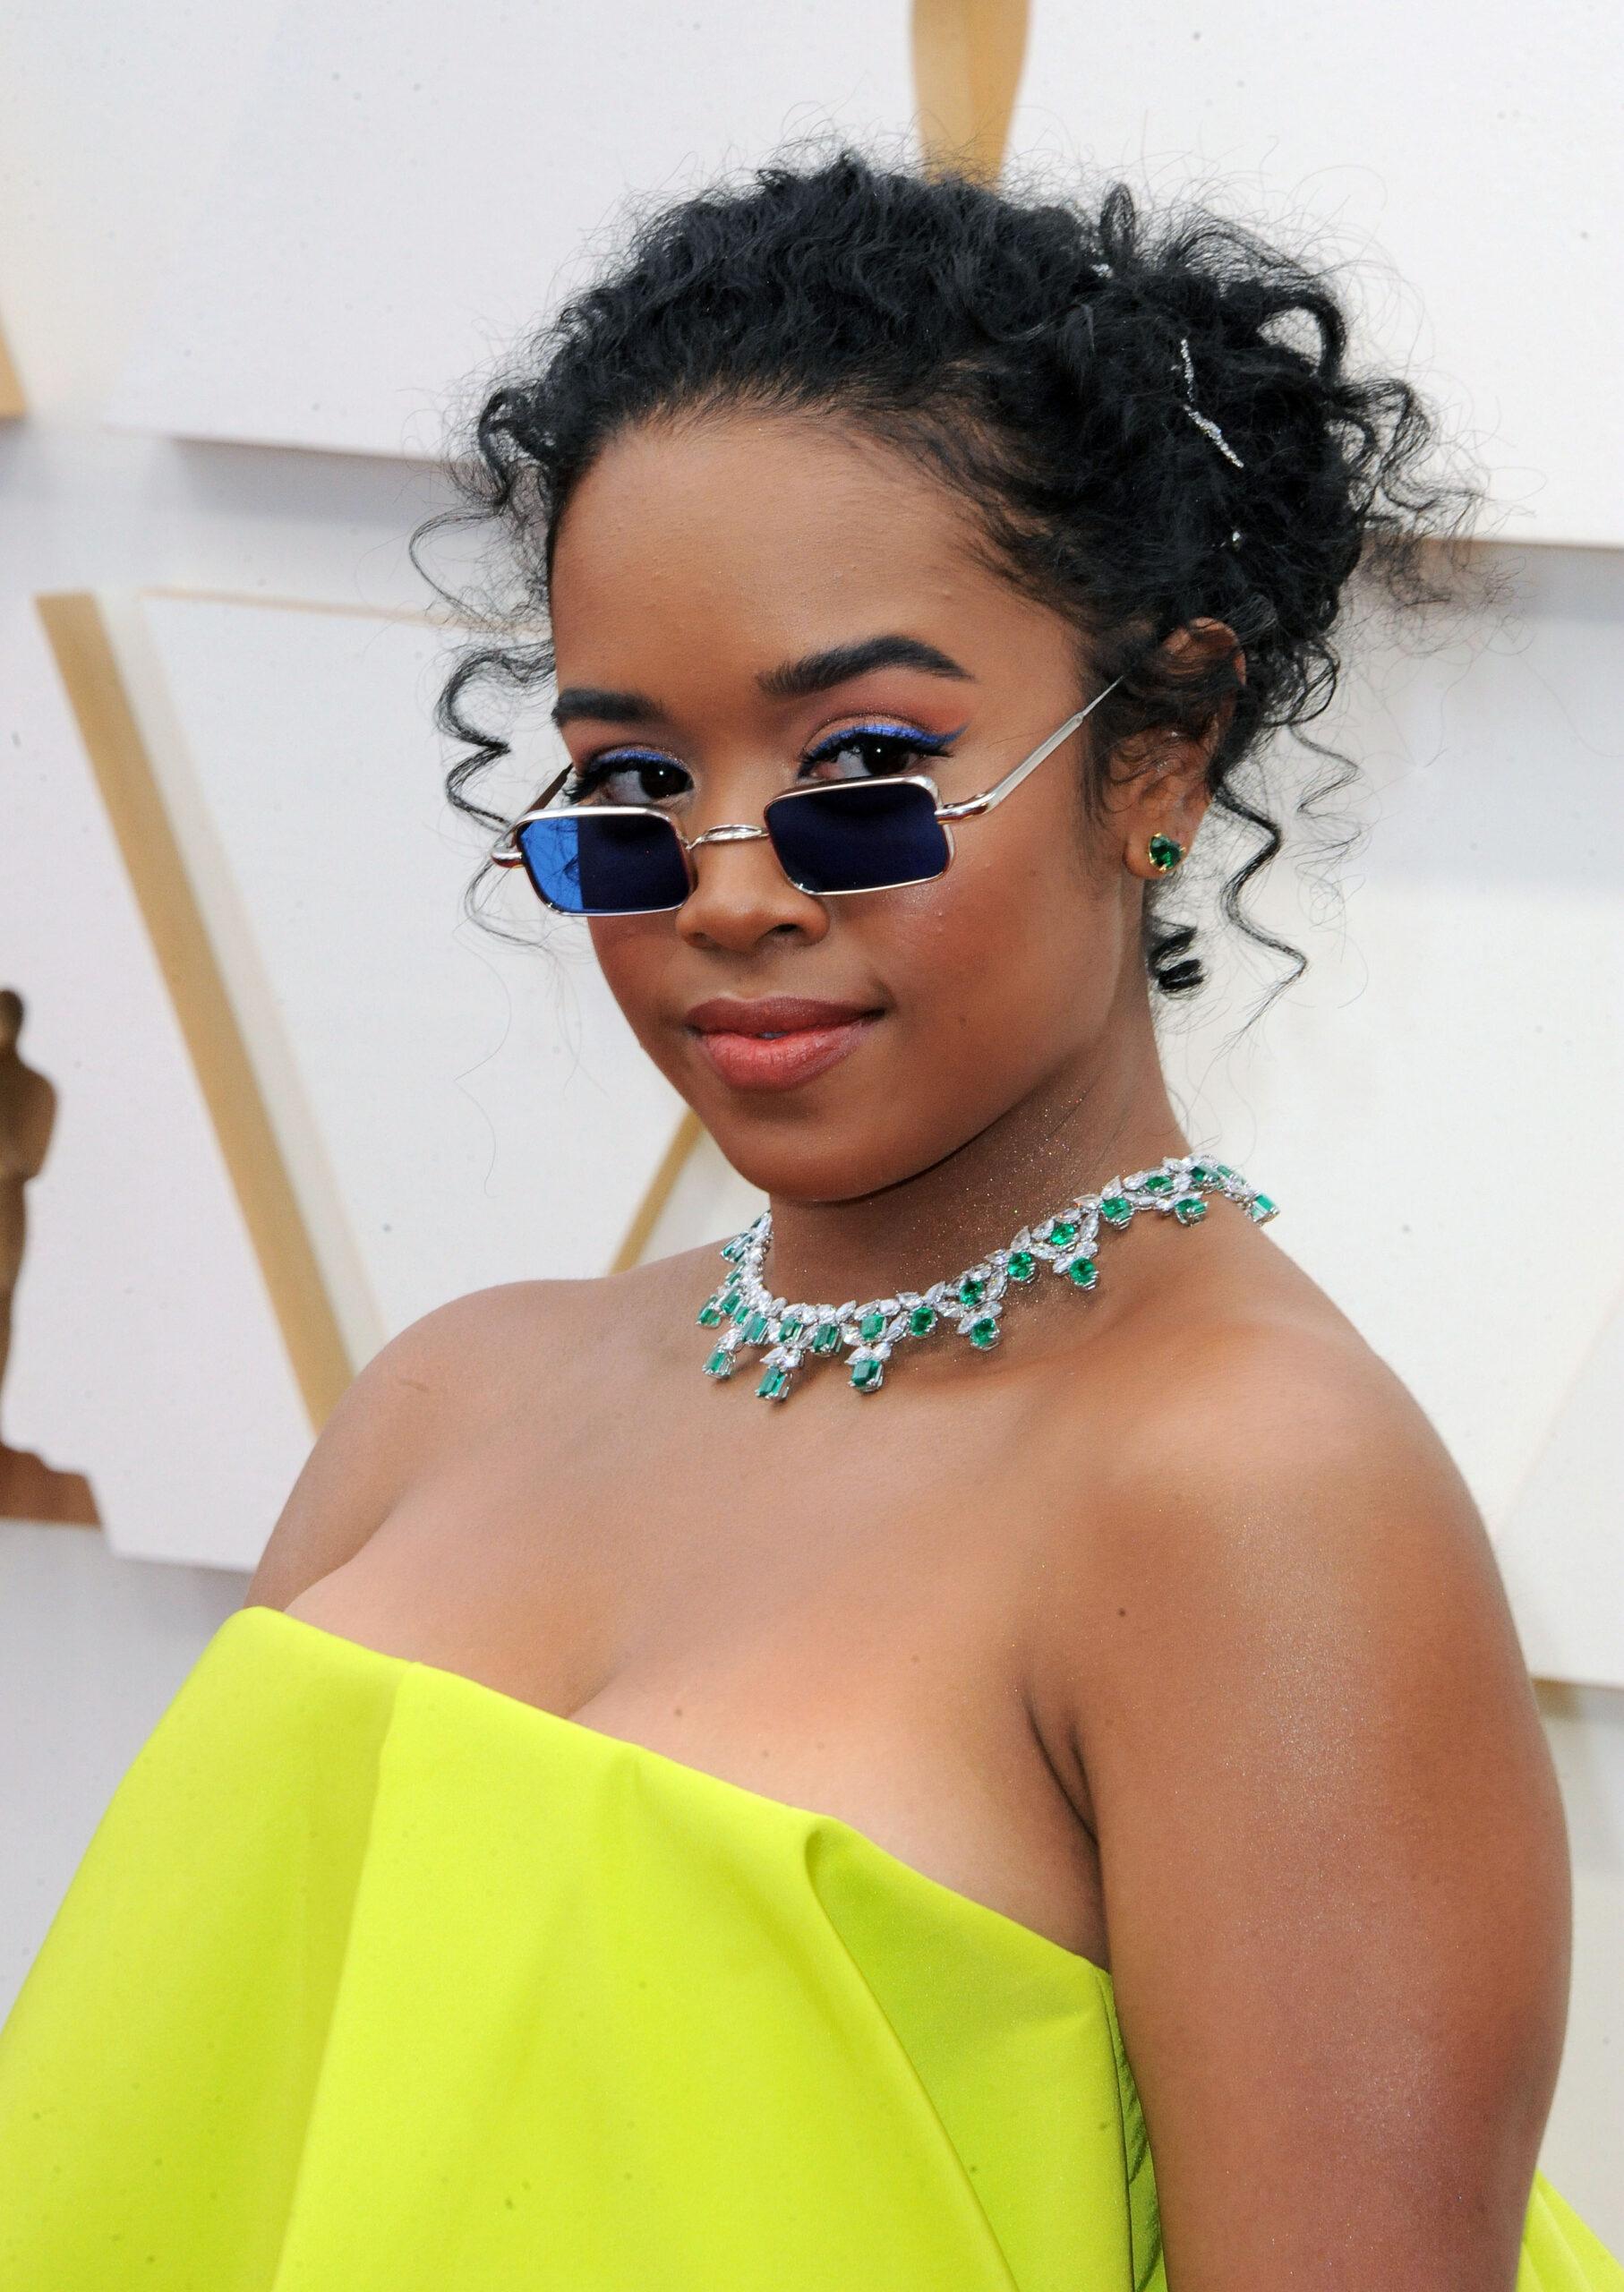 The 94th Annual Academy Awards - Arrivals at The Dolby Theatre in Hollywood, California on 3/28/22. 27 Mar 2022 Pictured: H.E.R. Photo credit: River / MEGA TheMegaAgency.com +1 888 505 6342 (Mega Agency TagID: MEGA842431_029.jpg) [Photo via Mega Agency]